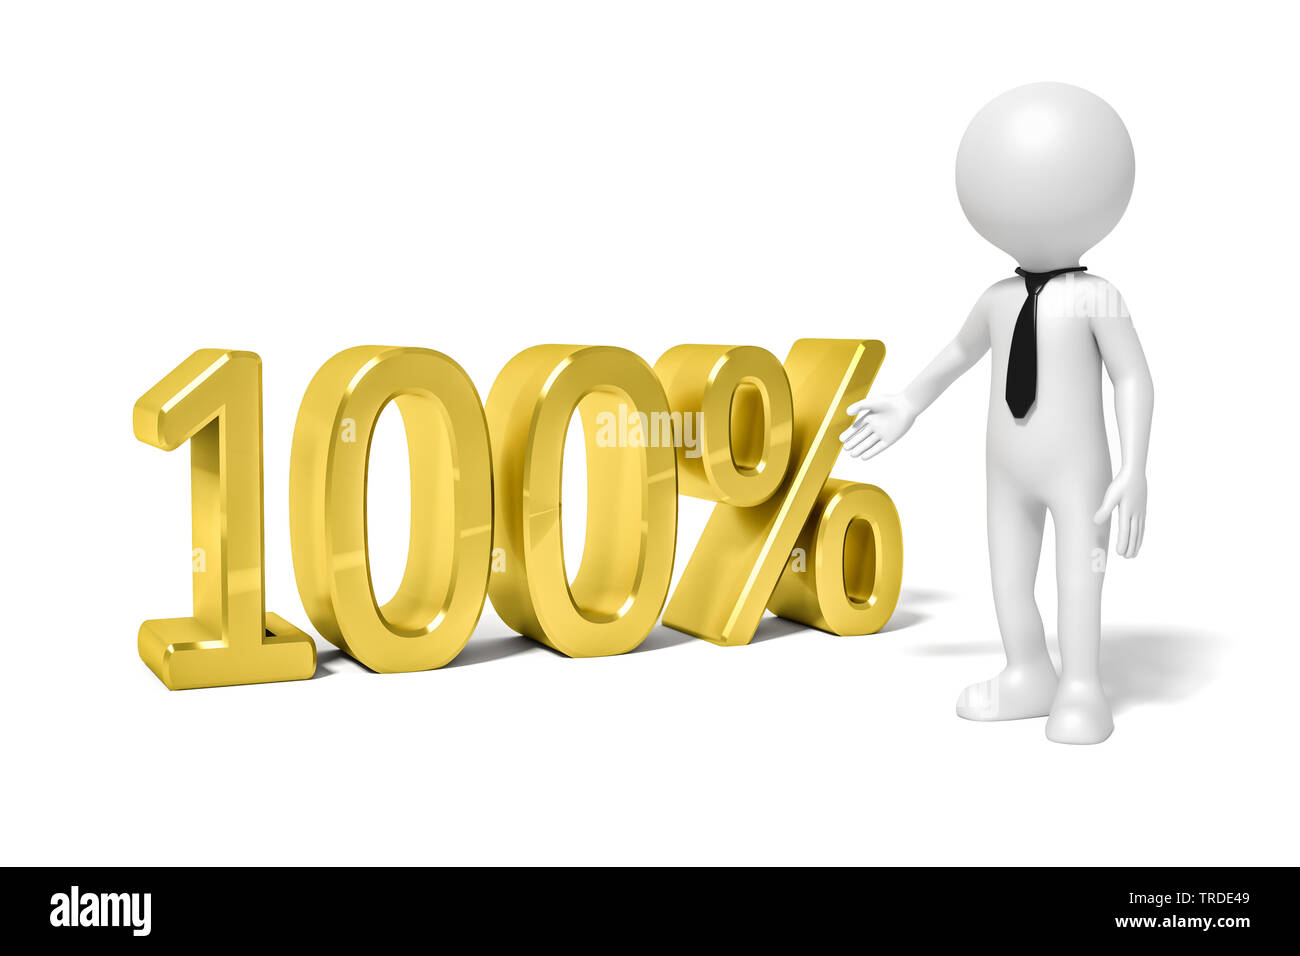 3D icon man in white color pointing towards an oversized lettering 100%; against white background Stock Photo